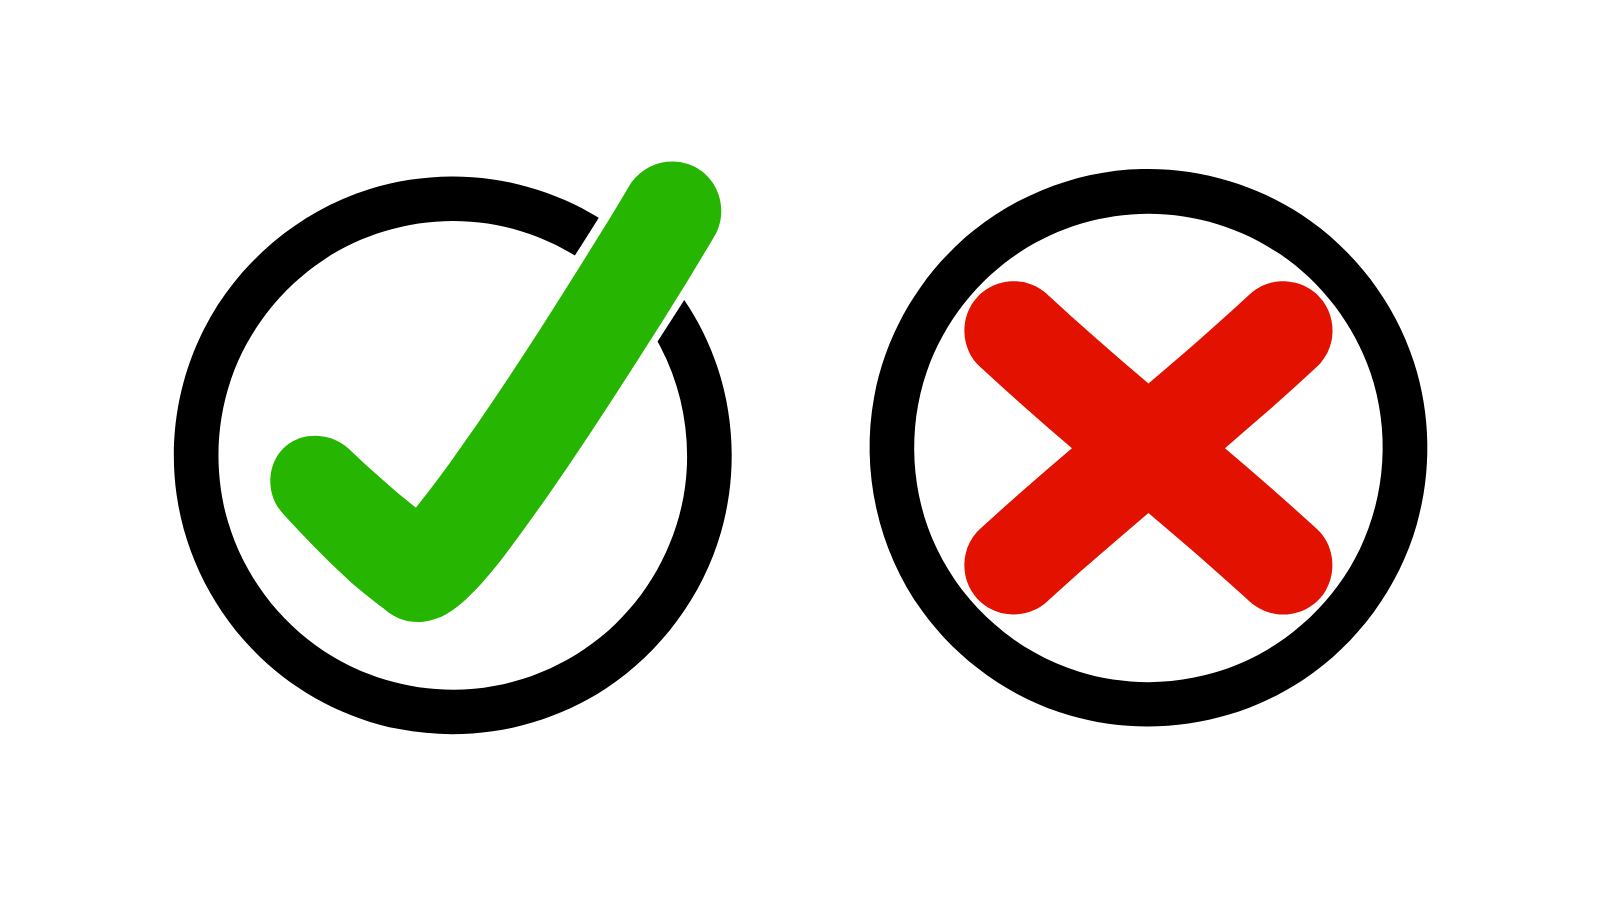 A green check and a red X